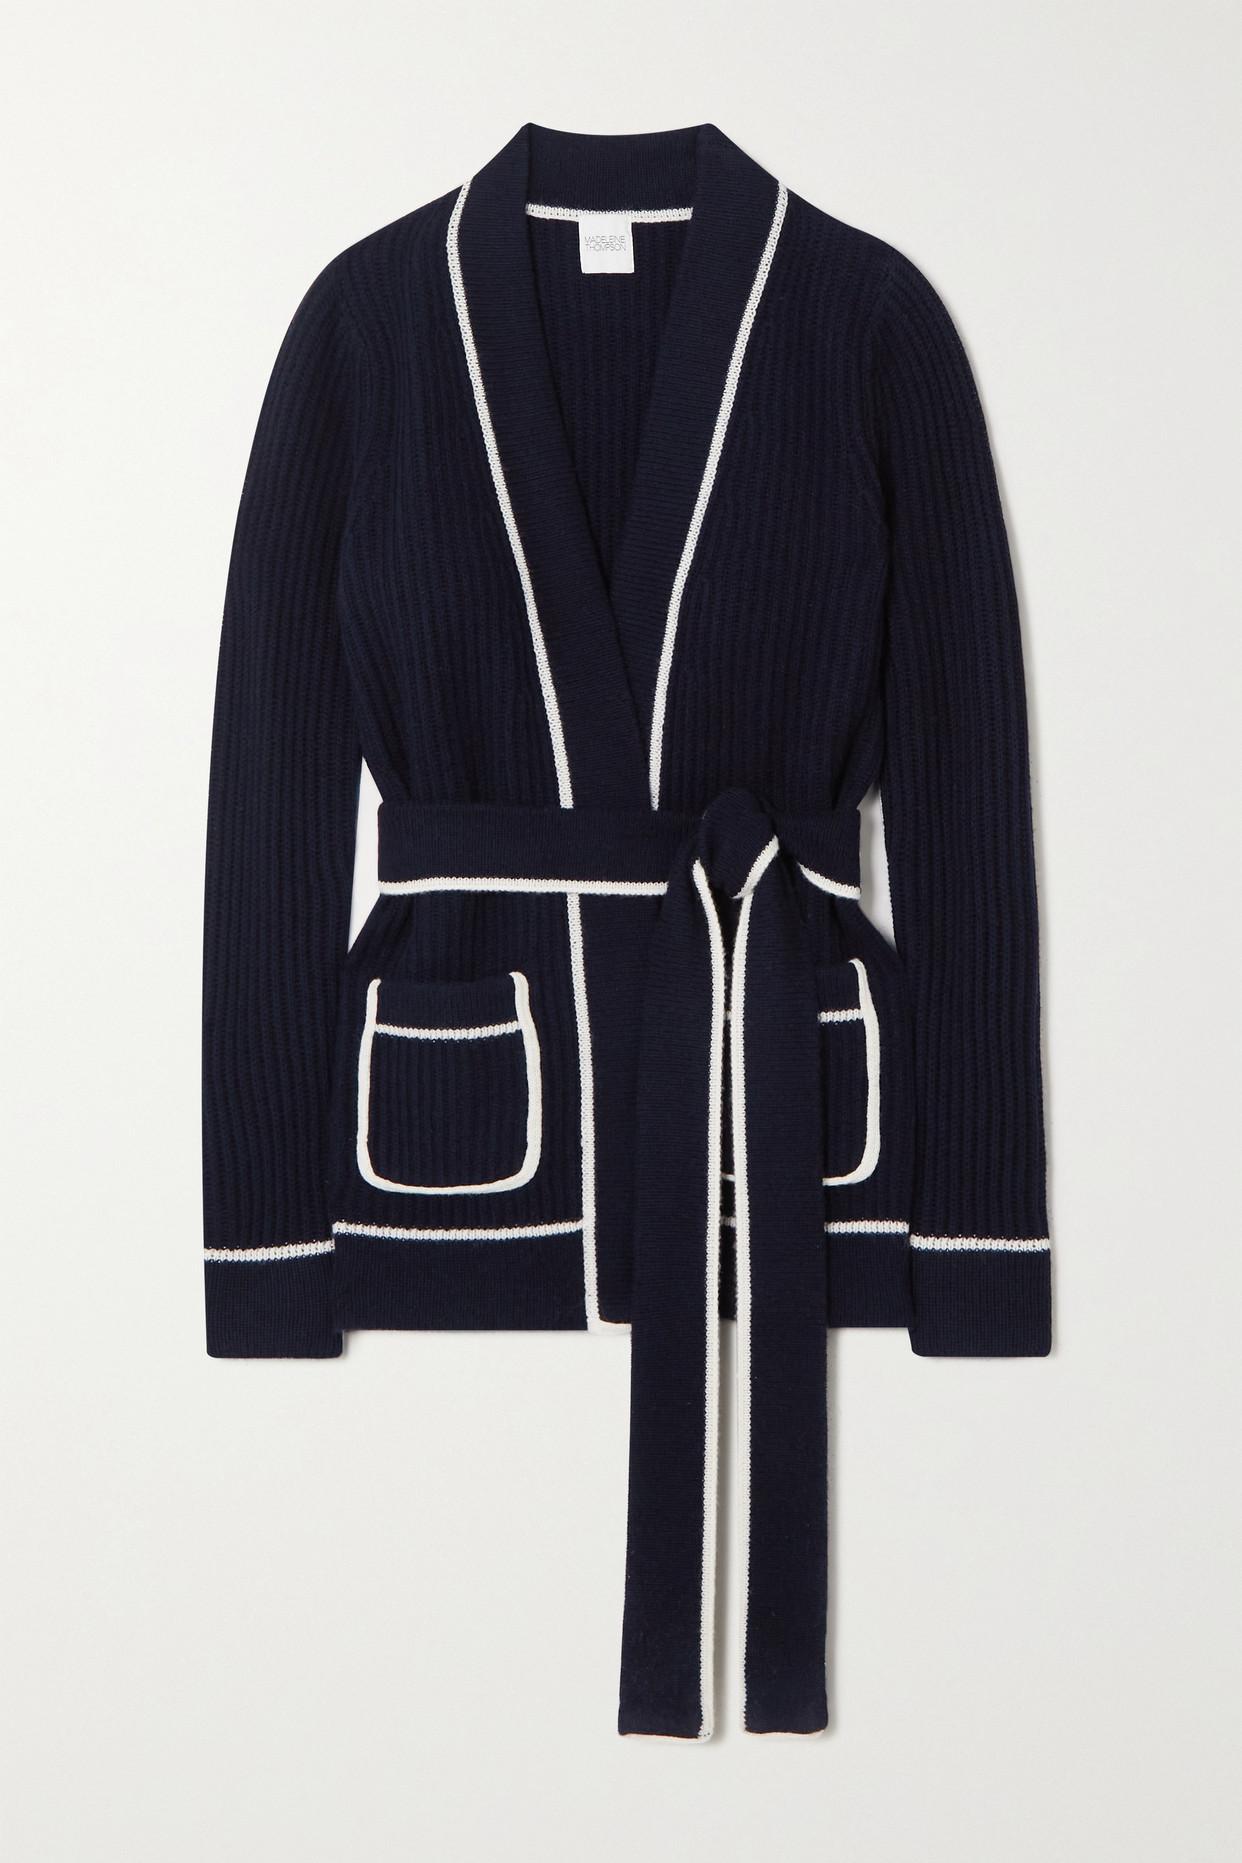 Madeleine Thompson Clover Belted Cashmere And Wool-blend Cardigan in Blue |  Lyst